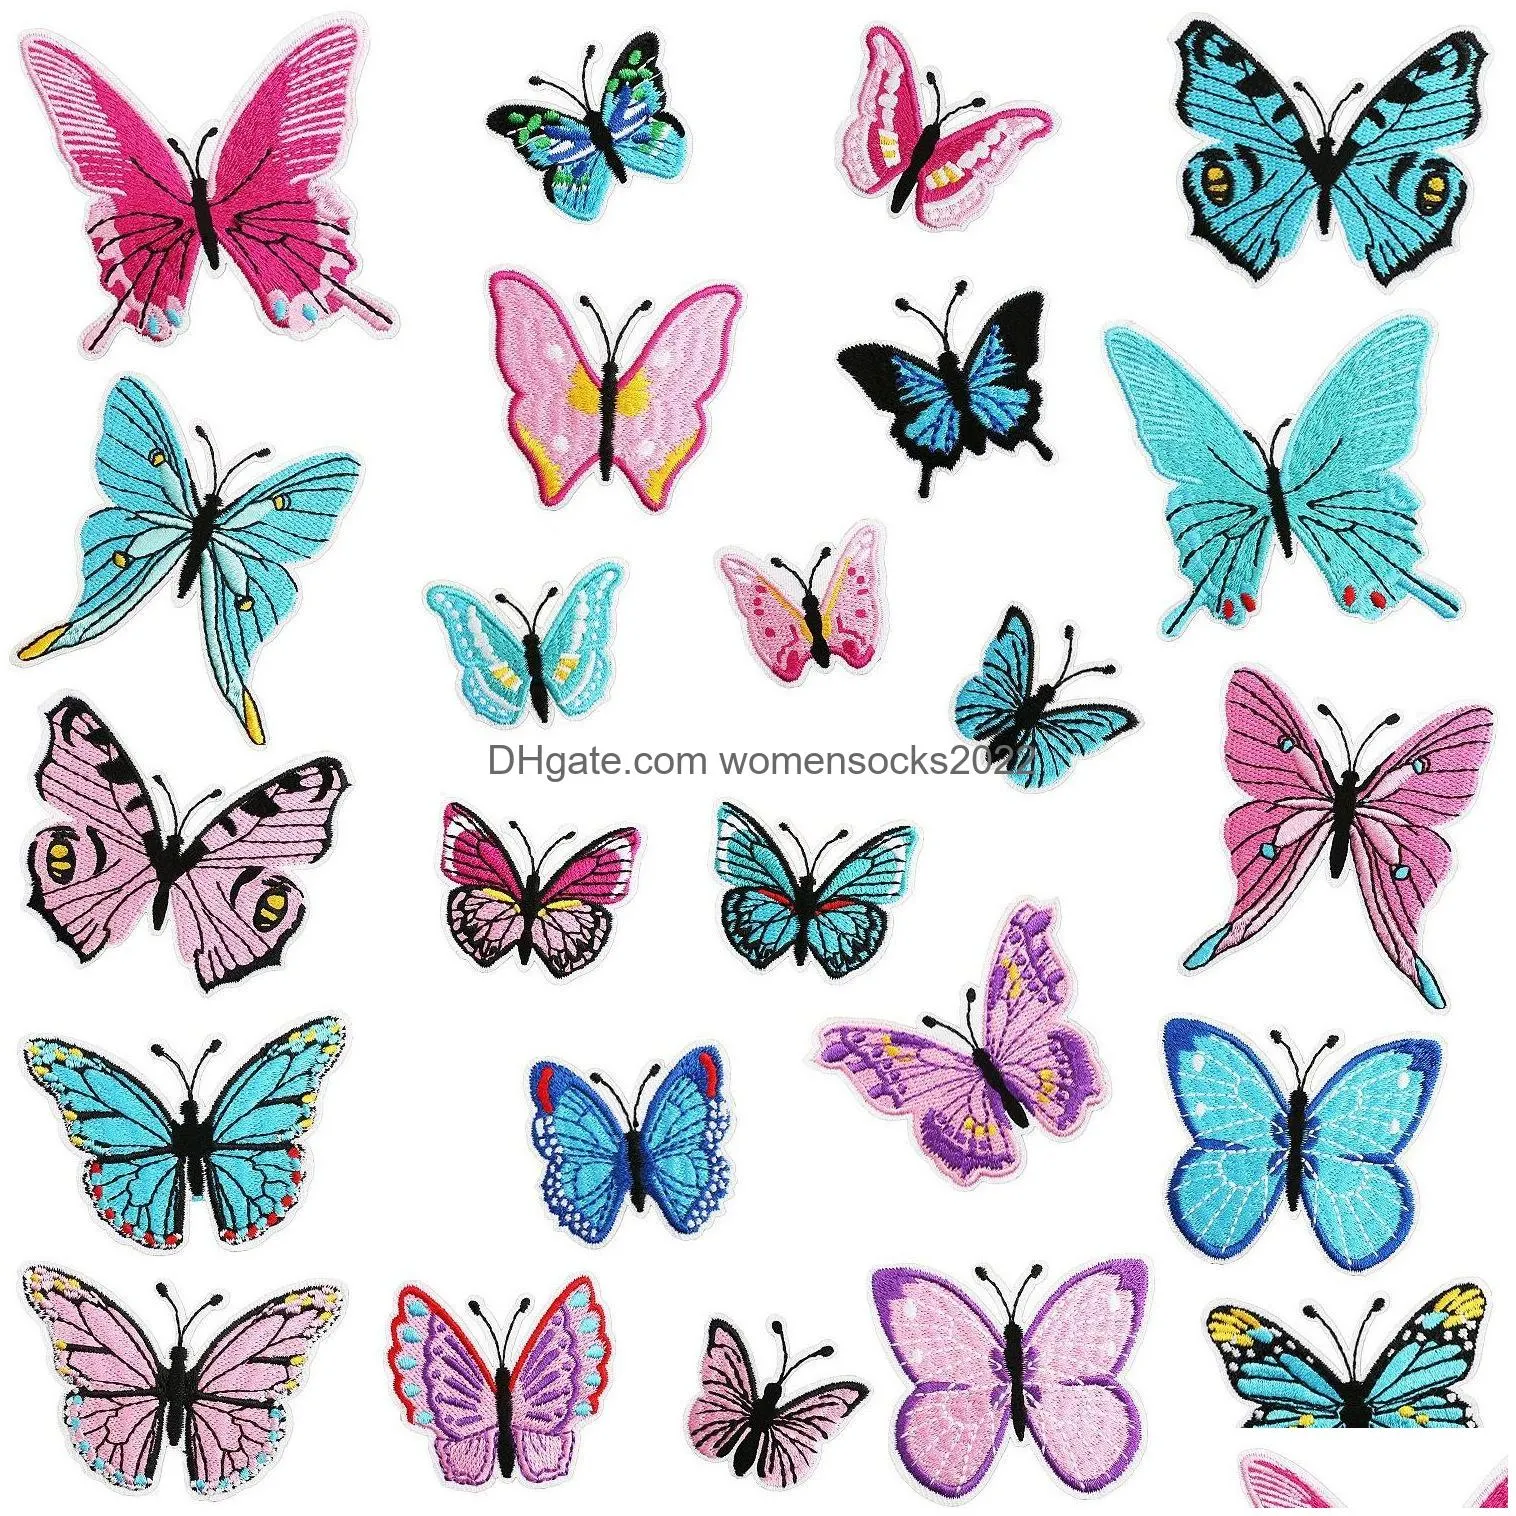 48 pieces butterfly iron ones assorted size colorful embroidered applique sew on repair for diy accessory clothing jeans jacket